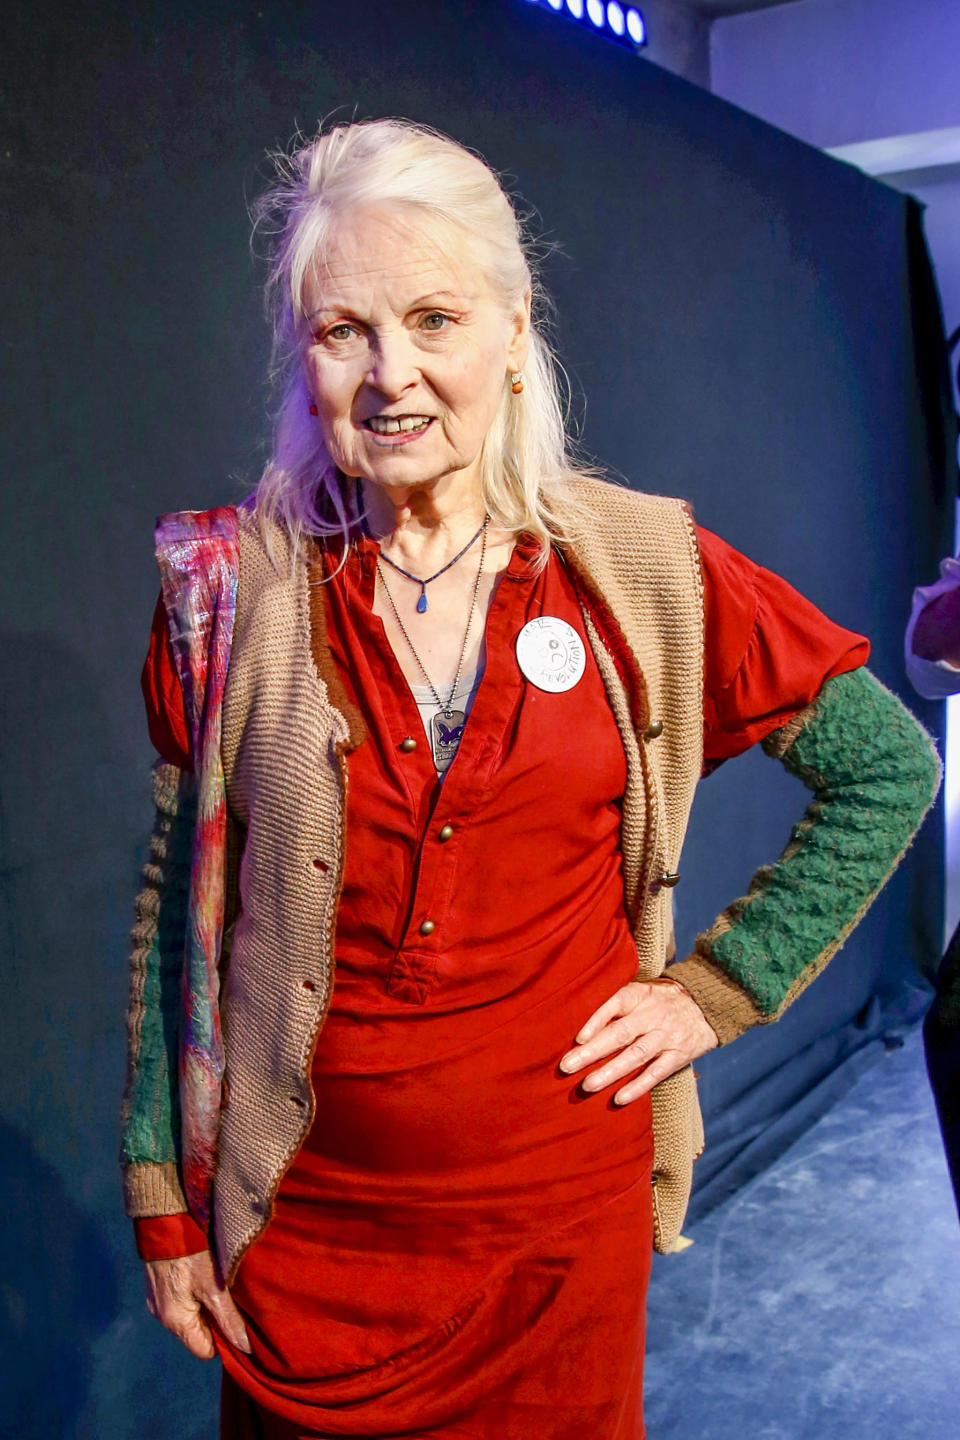 Fashion Designer Vivienne Westwood arrives at the Bread & Butter by Zalando event in 2017 (Photo: Isa Foltin/Getty Images for Zalando)